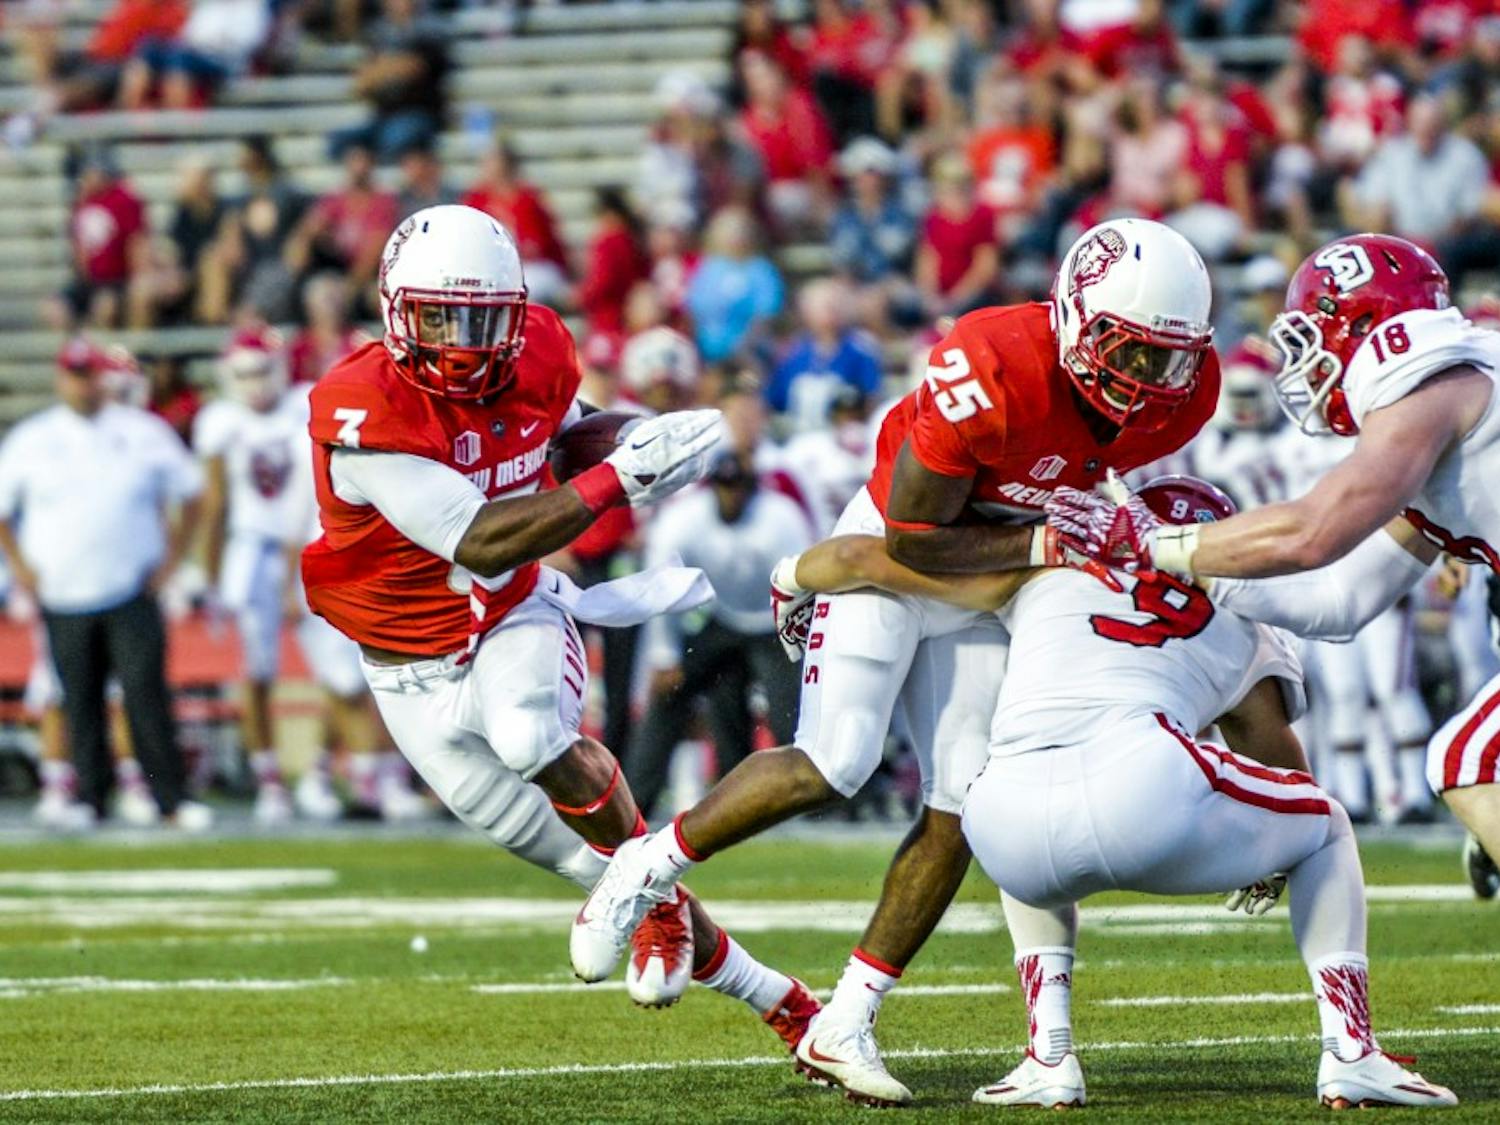 Junior running back Richard McQuarley, 3, finds a line through South Dakota's defense Thursday September 1, 2016 at University Stadium. The Lobos set the pace for their 2016 season with a 48-21 win over the Coyotes in their season opener.&nbsp;